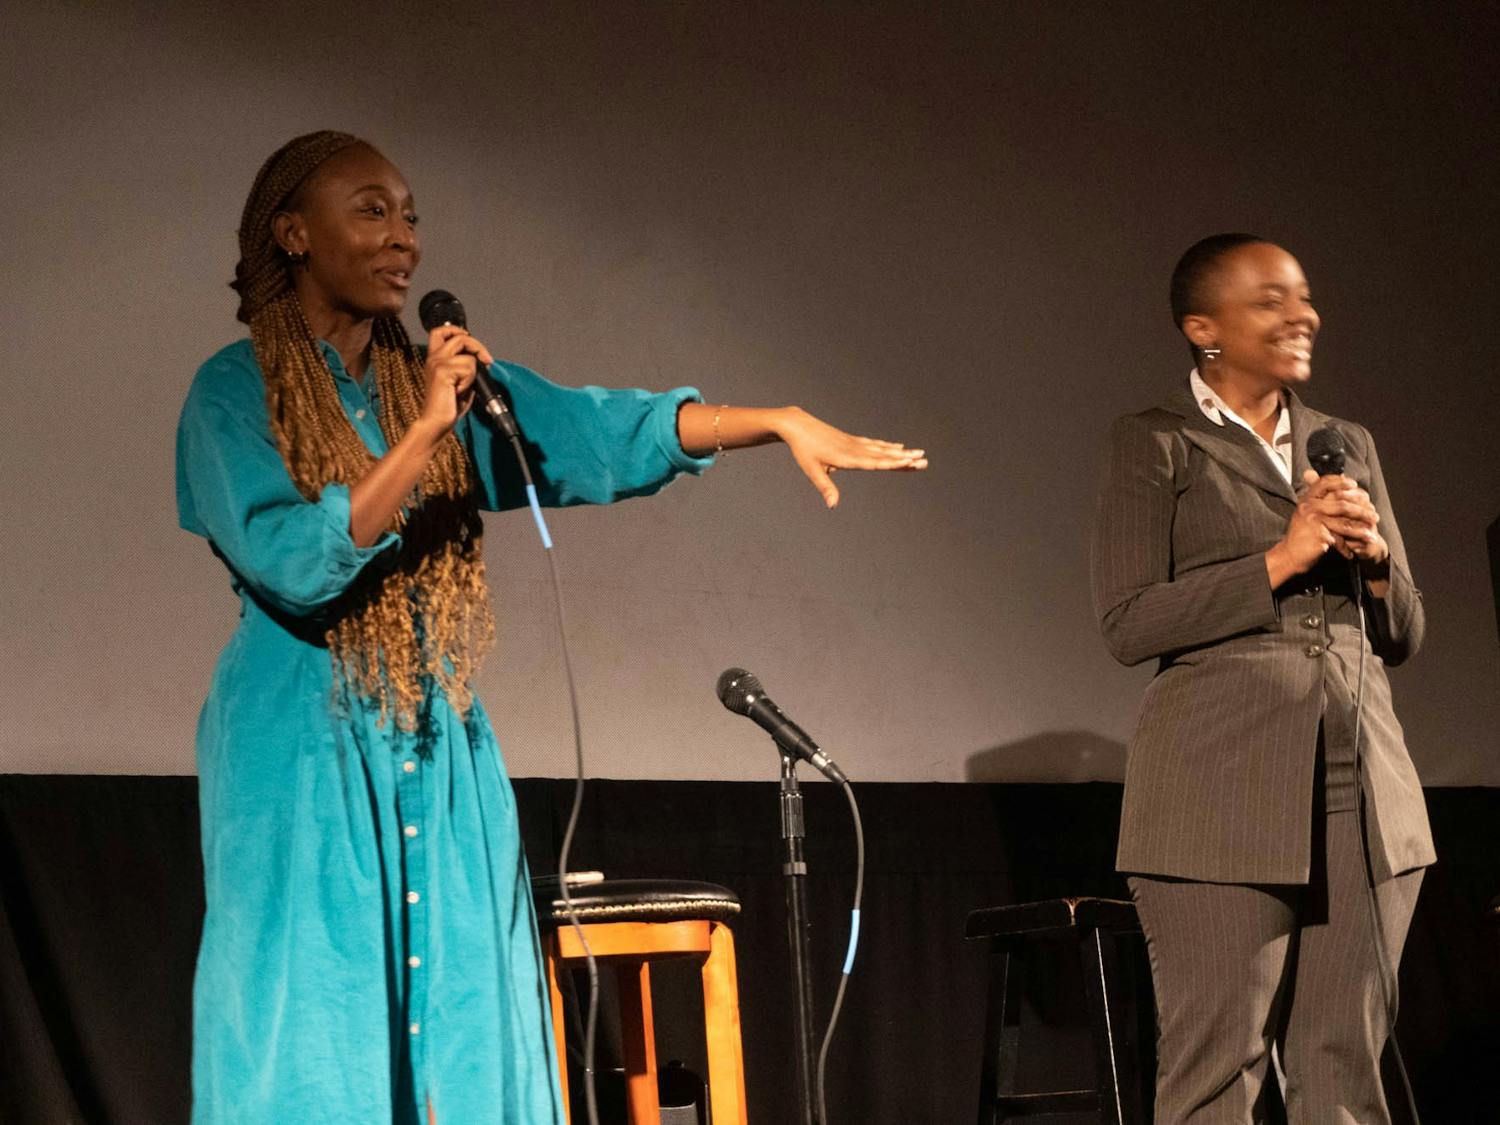 UNC Student Body President Taliajah "Teddy" Vann and student Jailyn Neville speak during the second annual Chapel Hill Black Film Festival, on Friday, Feb. 10, 2023.